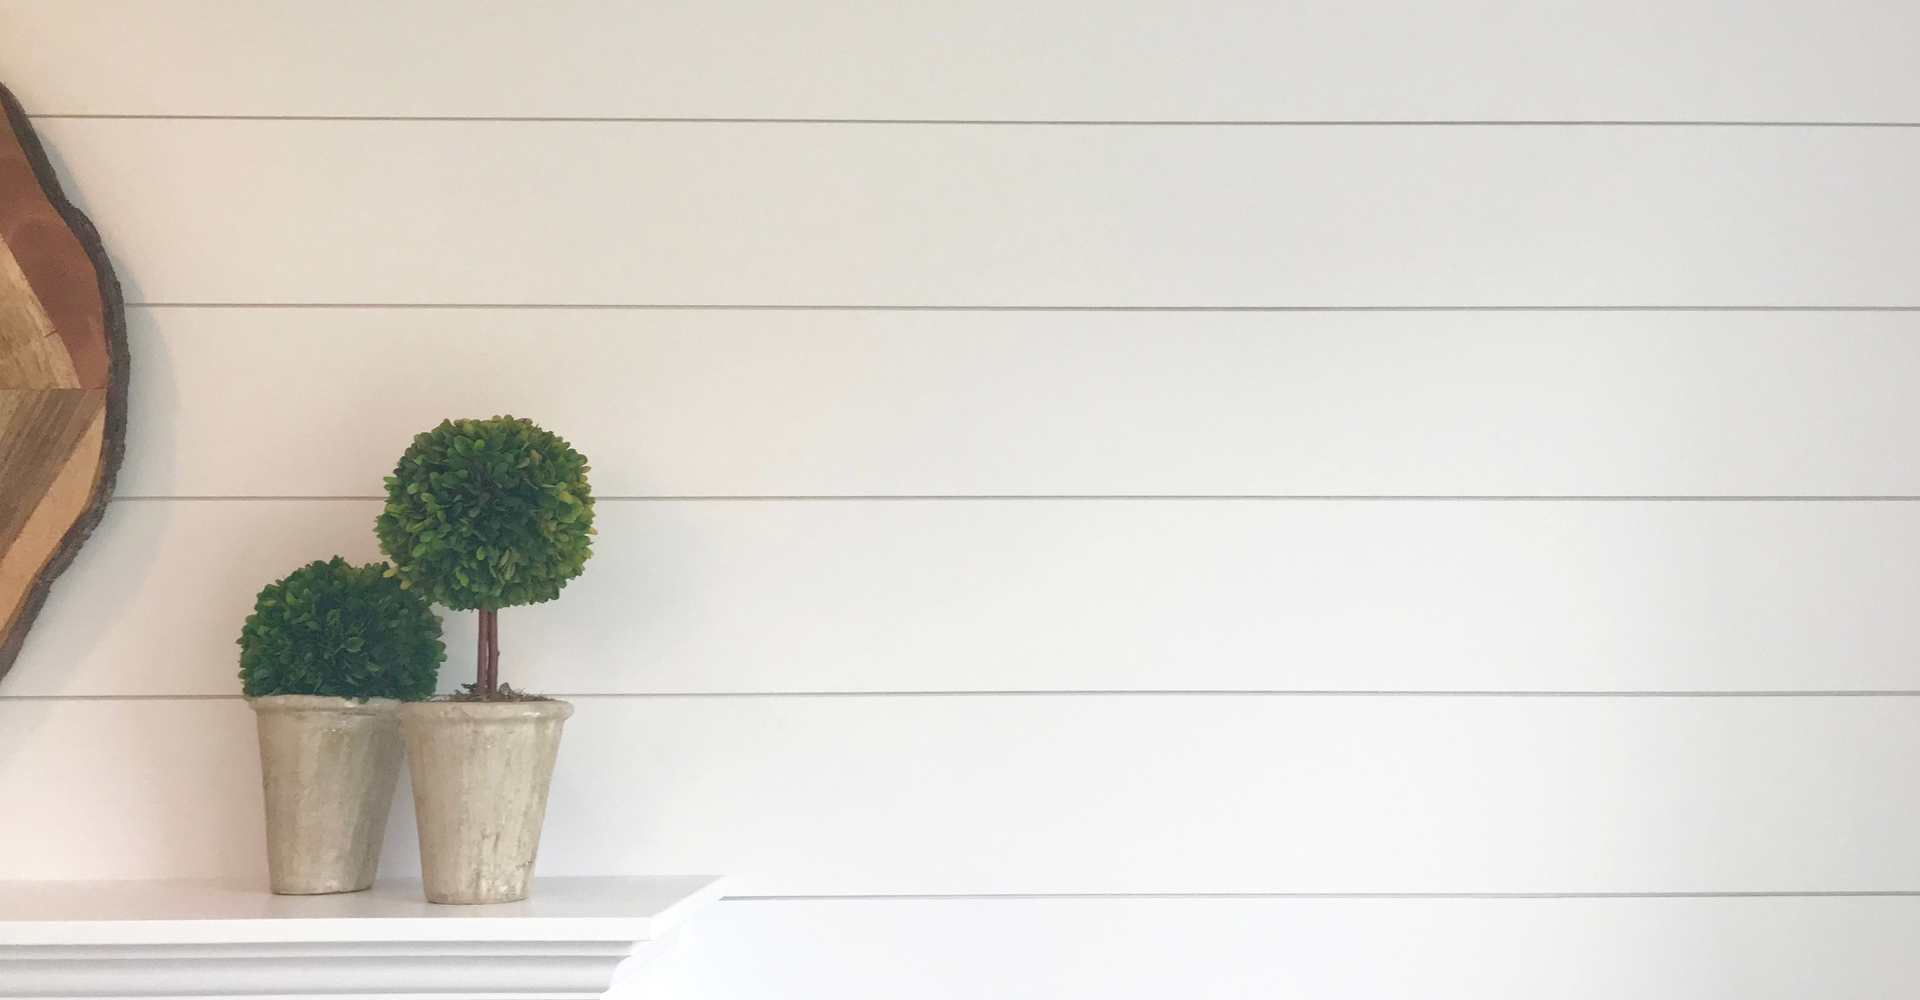 5 CREATIVE WAYS TO DECORATE WITH SHIPLAP